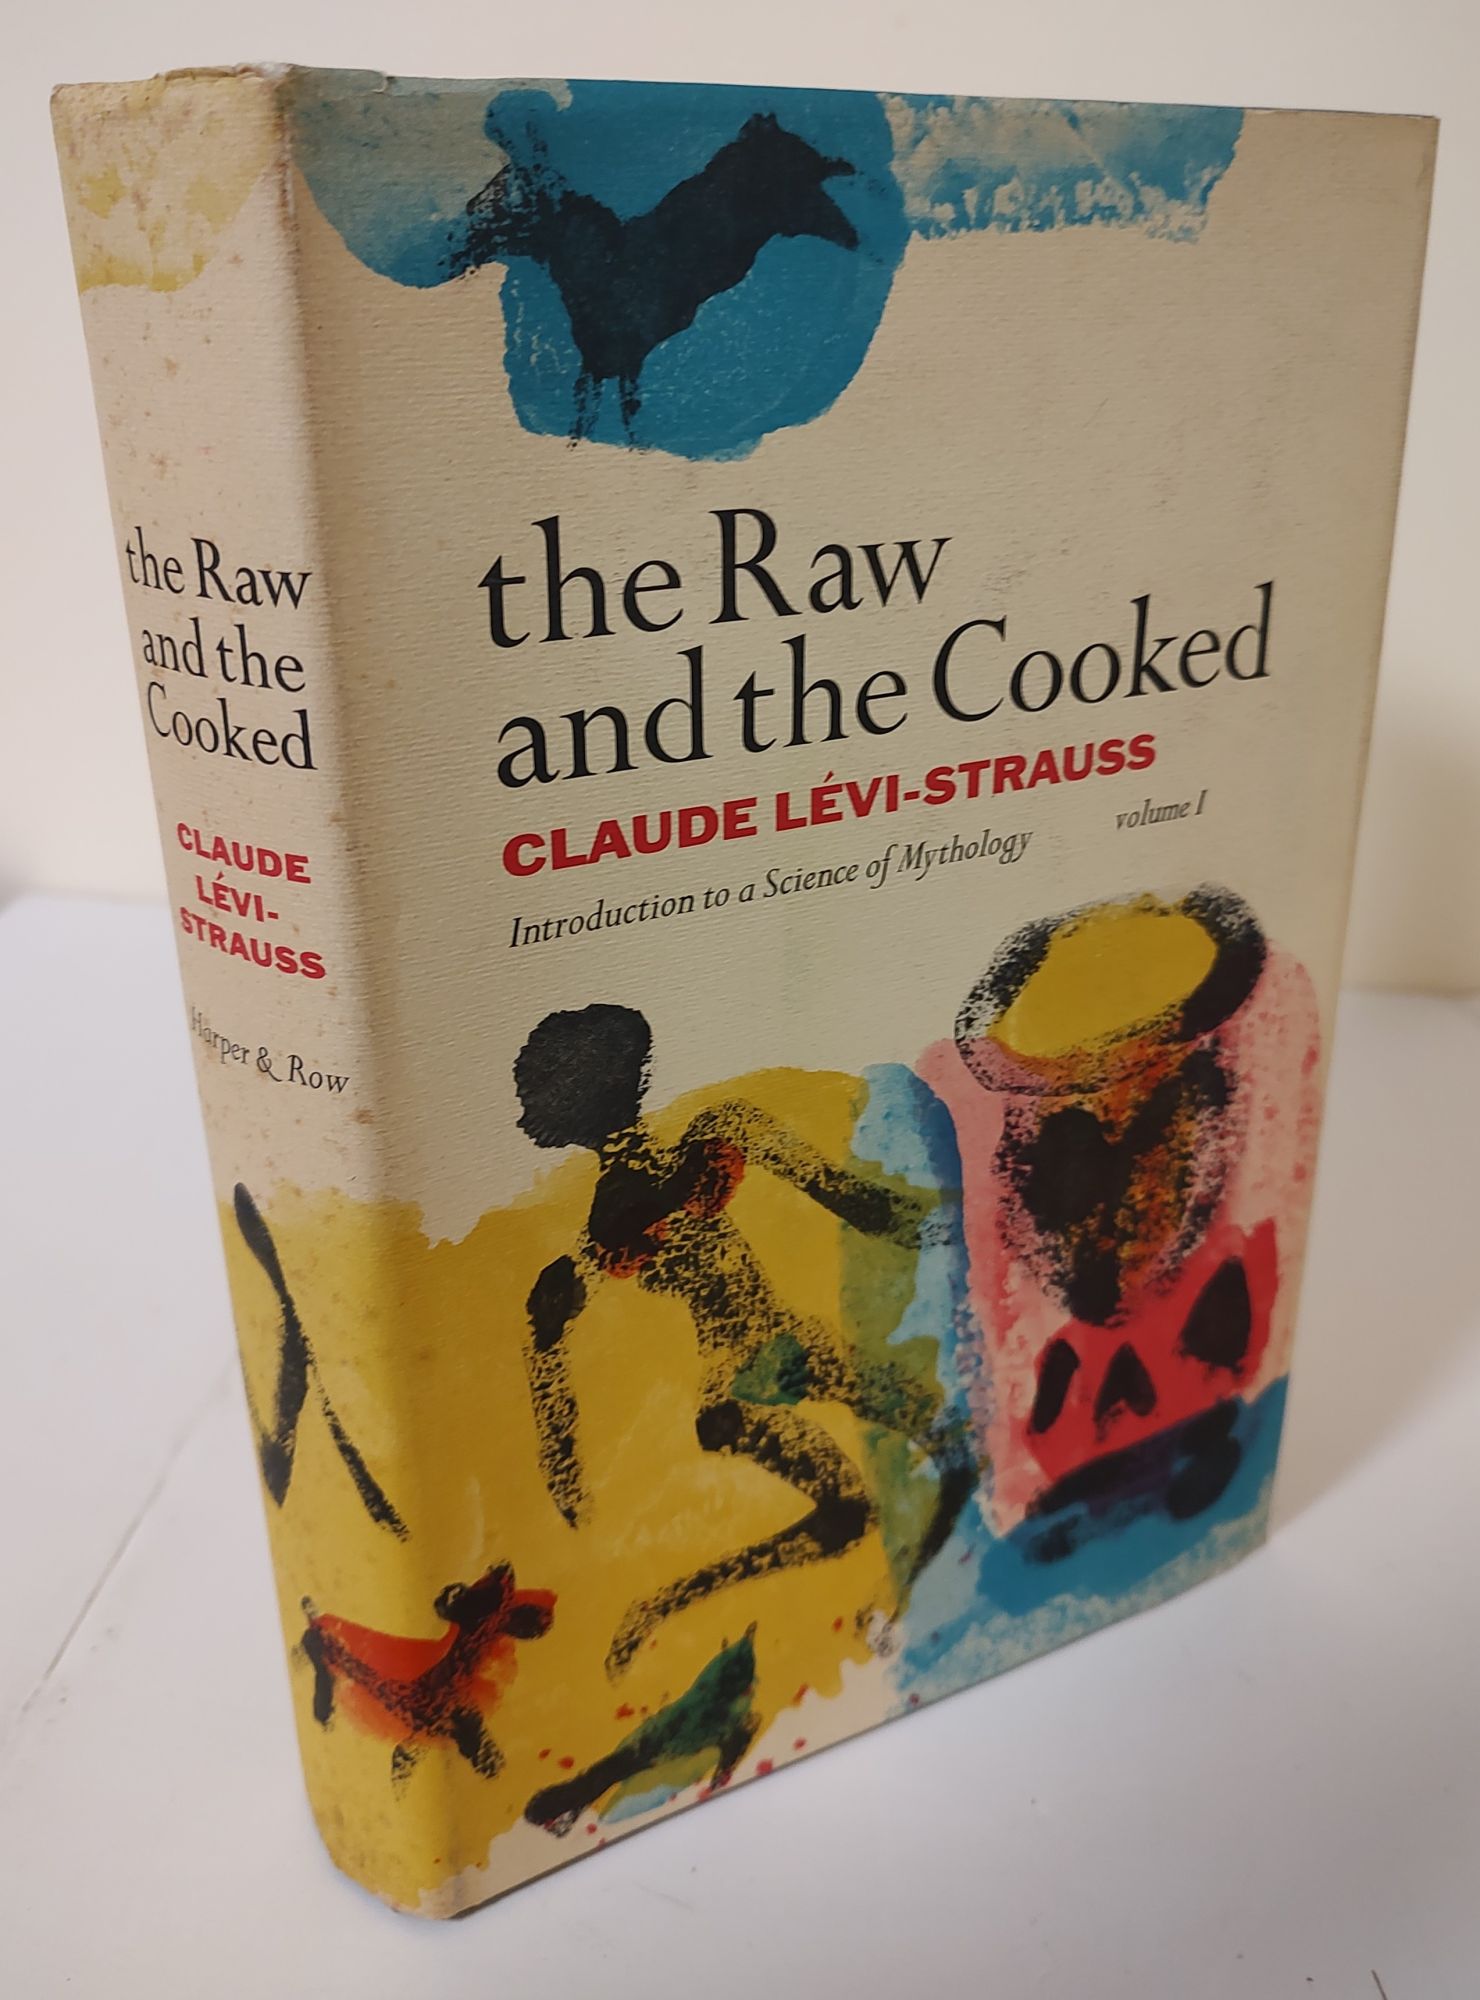 Shaded Arabiske Sarabo peave The Raw and the Cooked; introduction to a science of mythology, Volume I.  by Levi-Strauss, Claude: Good Cloth (1969) First American Edition. |  Waysidebooks